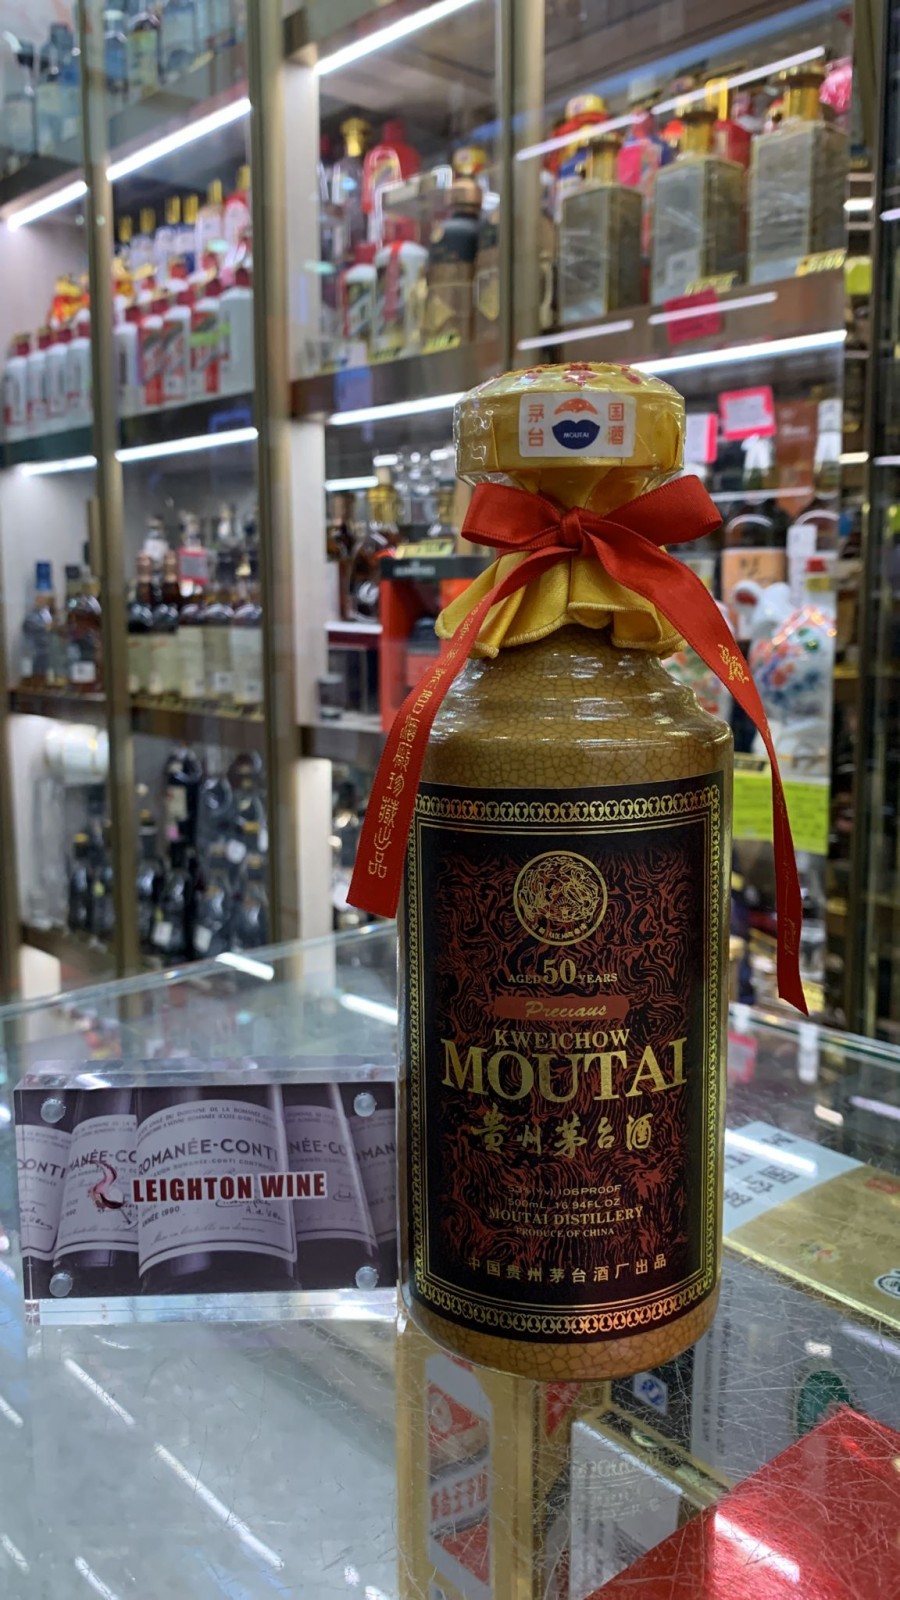 Kweichow Moutai 50 Year Old 500ml 2000年（without box)